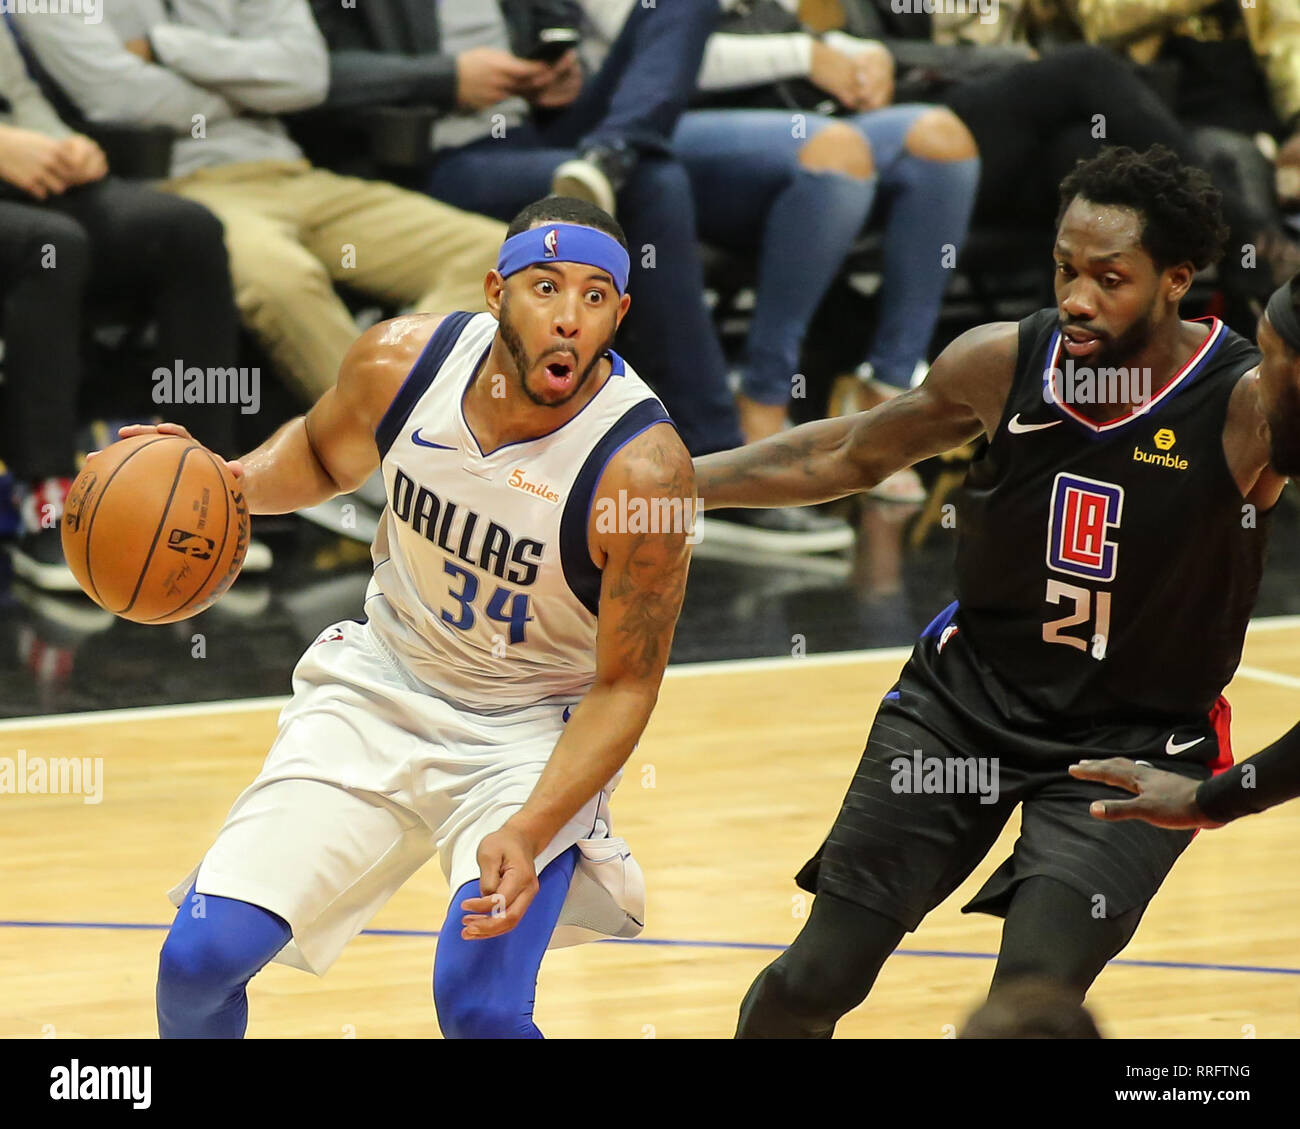 Los Angeles, CA, USA. 25th Feb, 2019. Dallas Mavericks guard Devin Harris #34 seeing something during the Dallas Mavericks vs Los Angeles Clippers at Staples Center on February 25, 2019. (Photo by Jevone Moore) Credit: csm/Alamy Live News Stock Photo